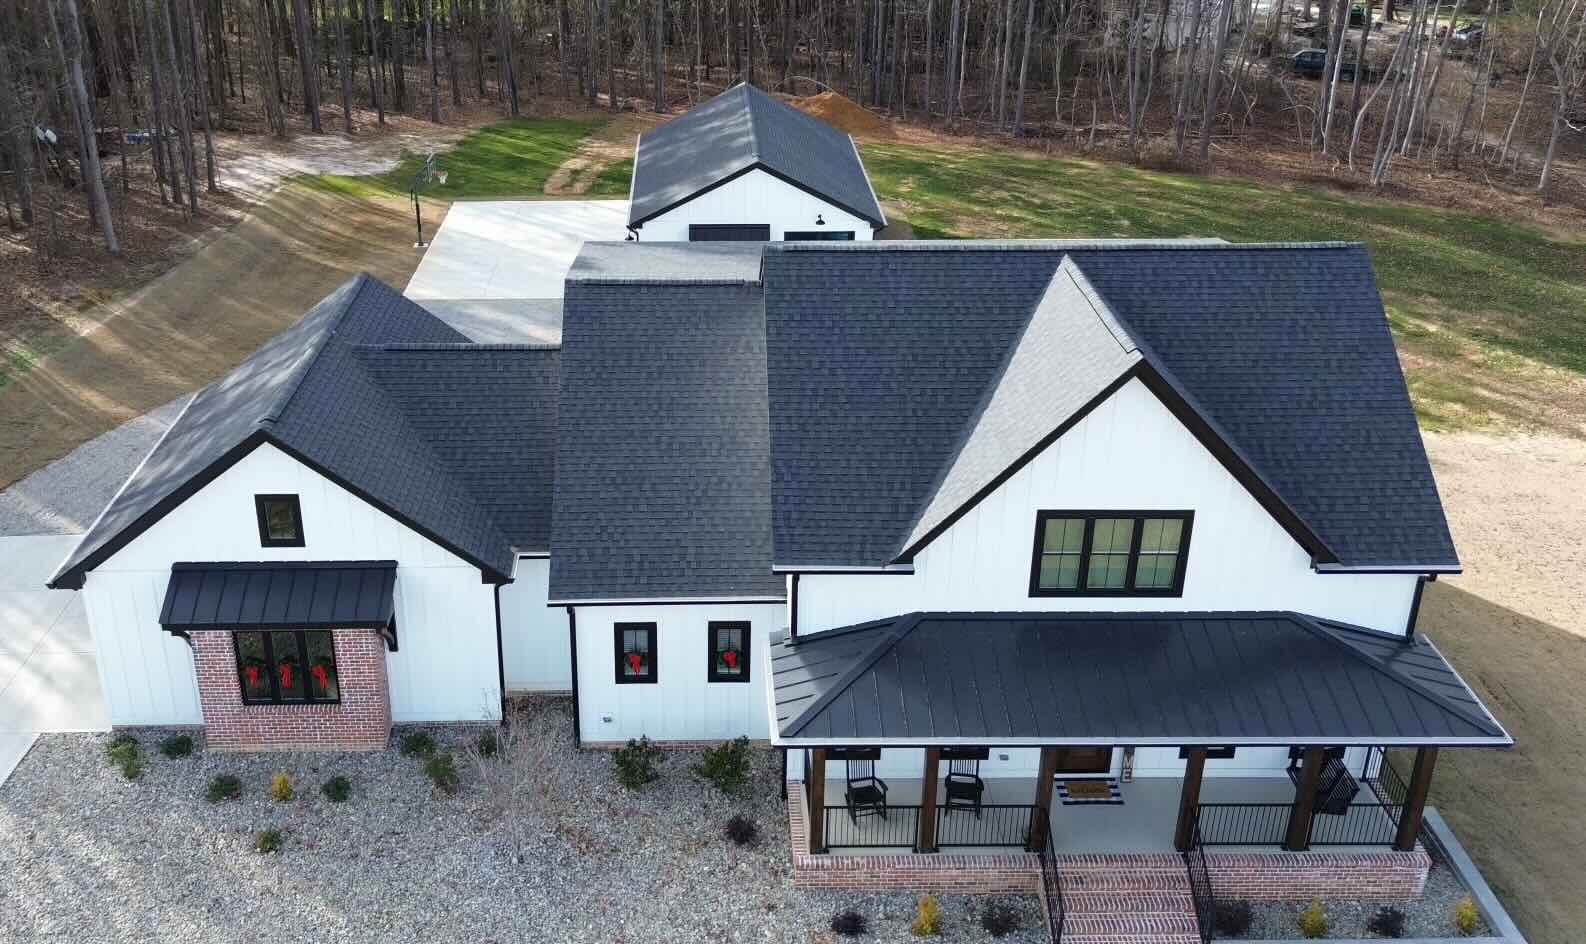 Best roofers in Fuquay Varina - Roofing Company - Avilez Roofing